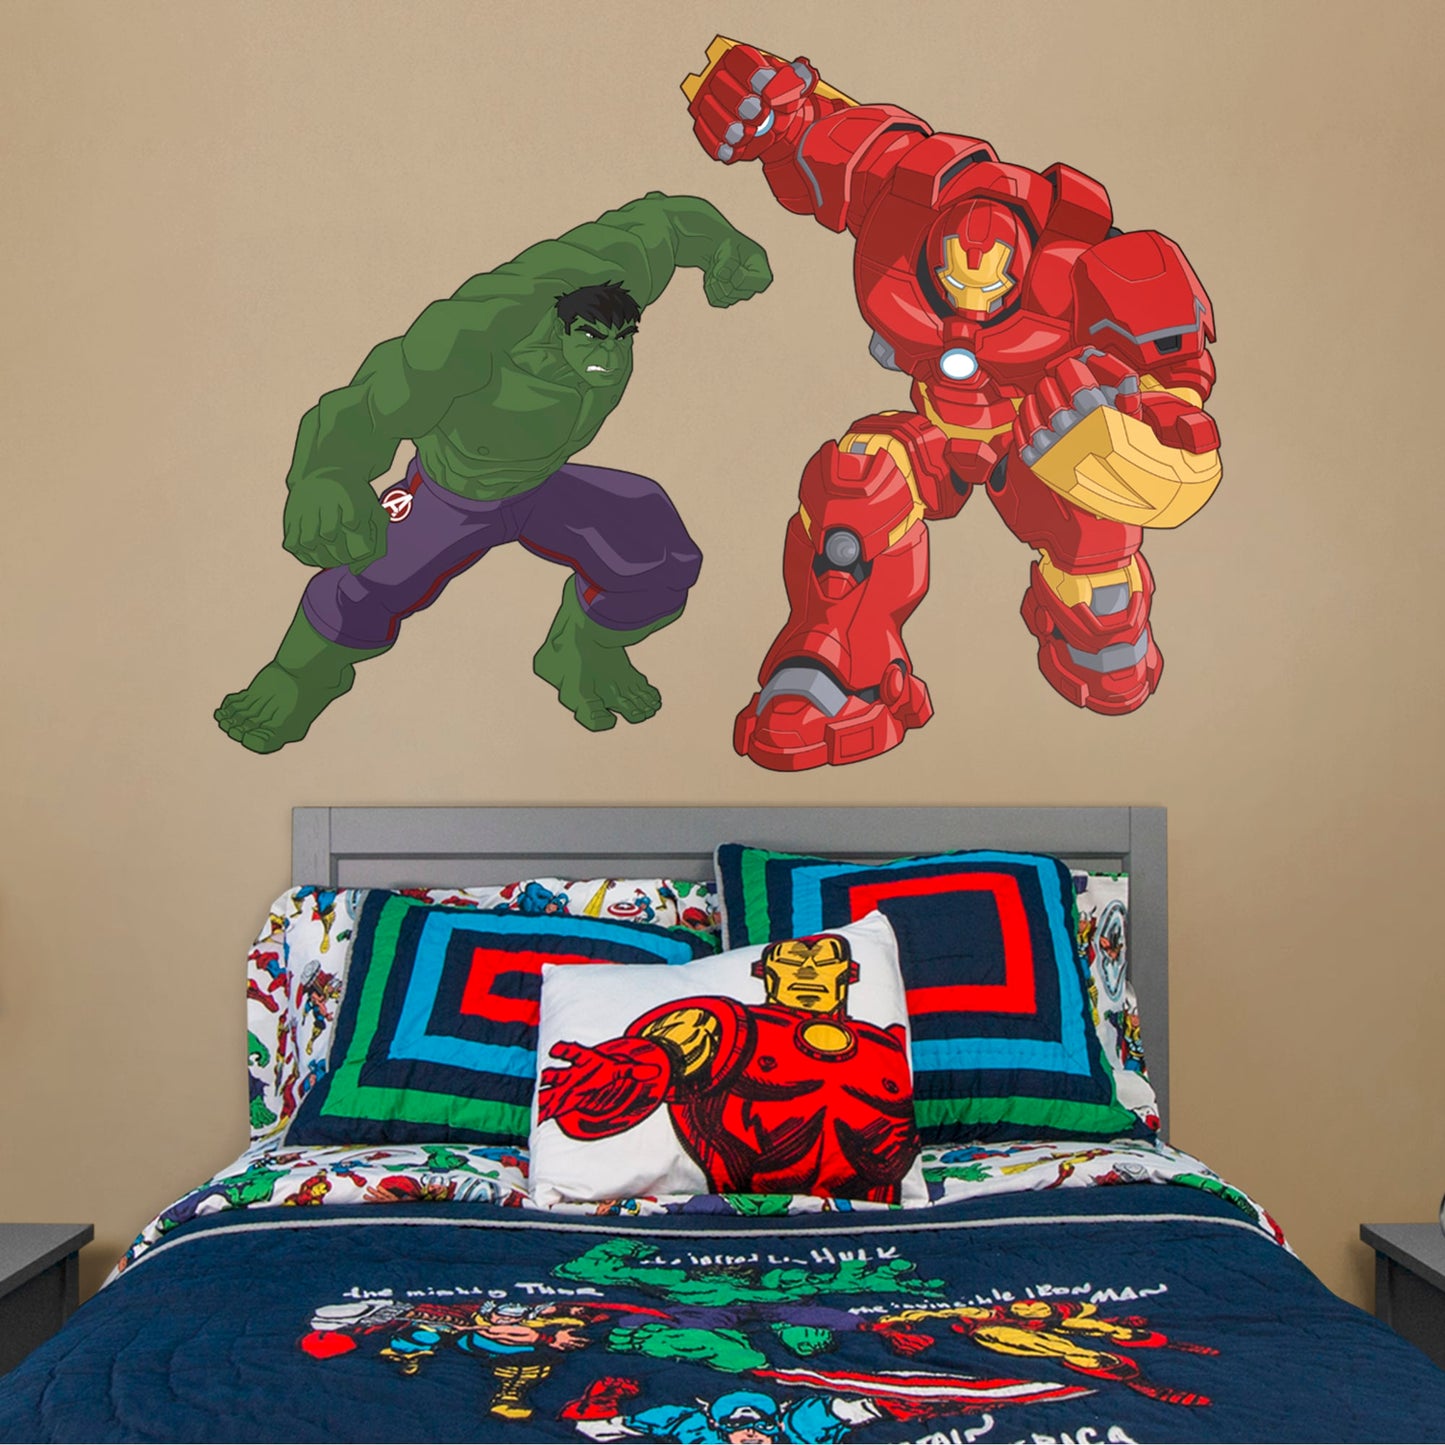 Hulk v Hulkbuster Cartoon: Avengers Assemble - Officially Licensed Removable Wall Decal